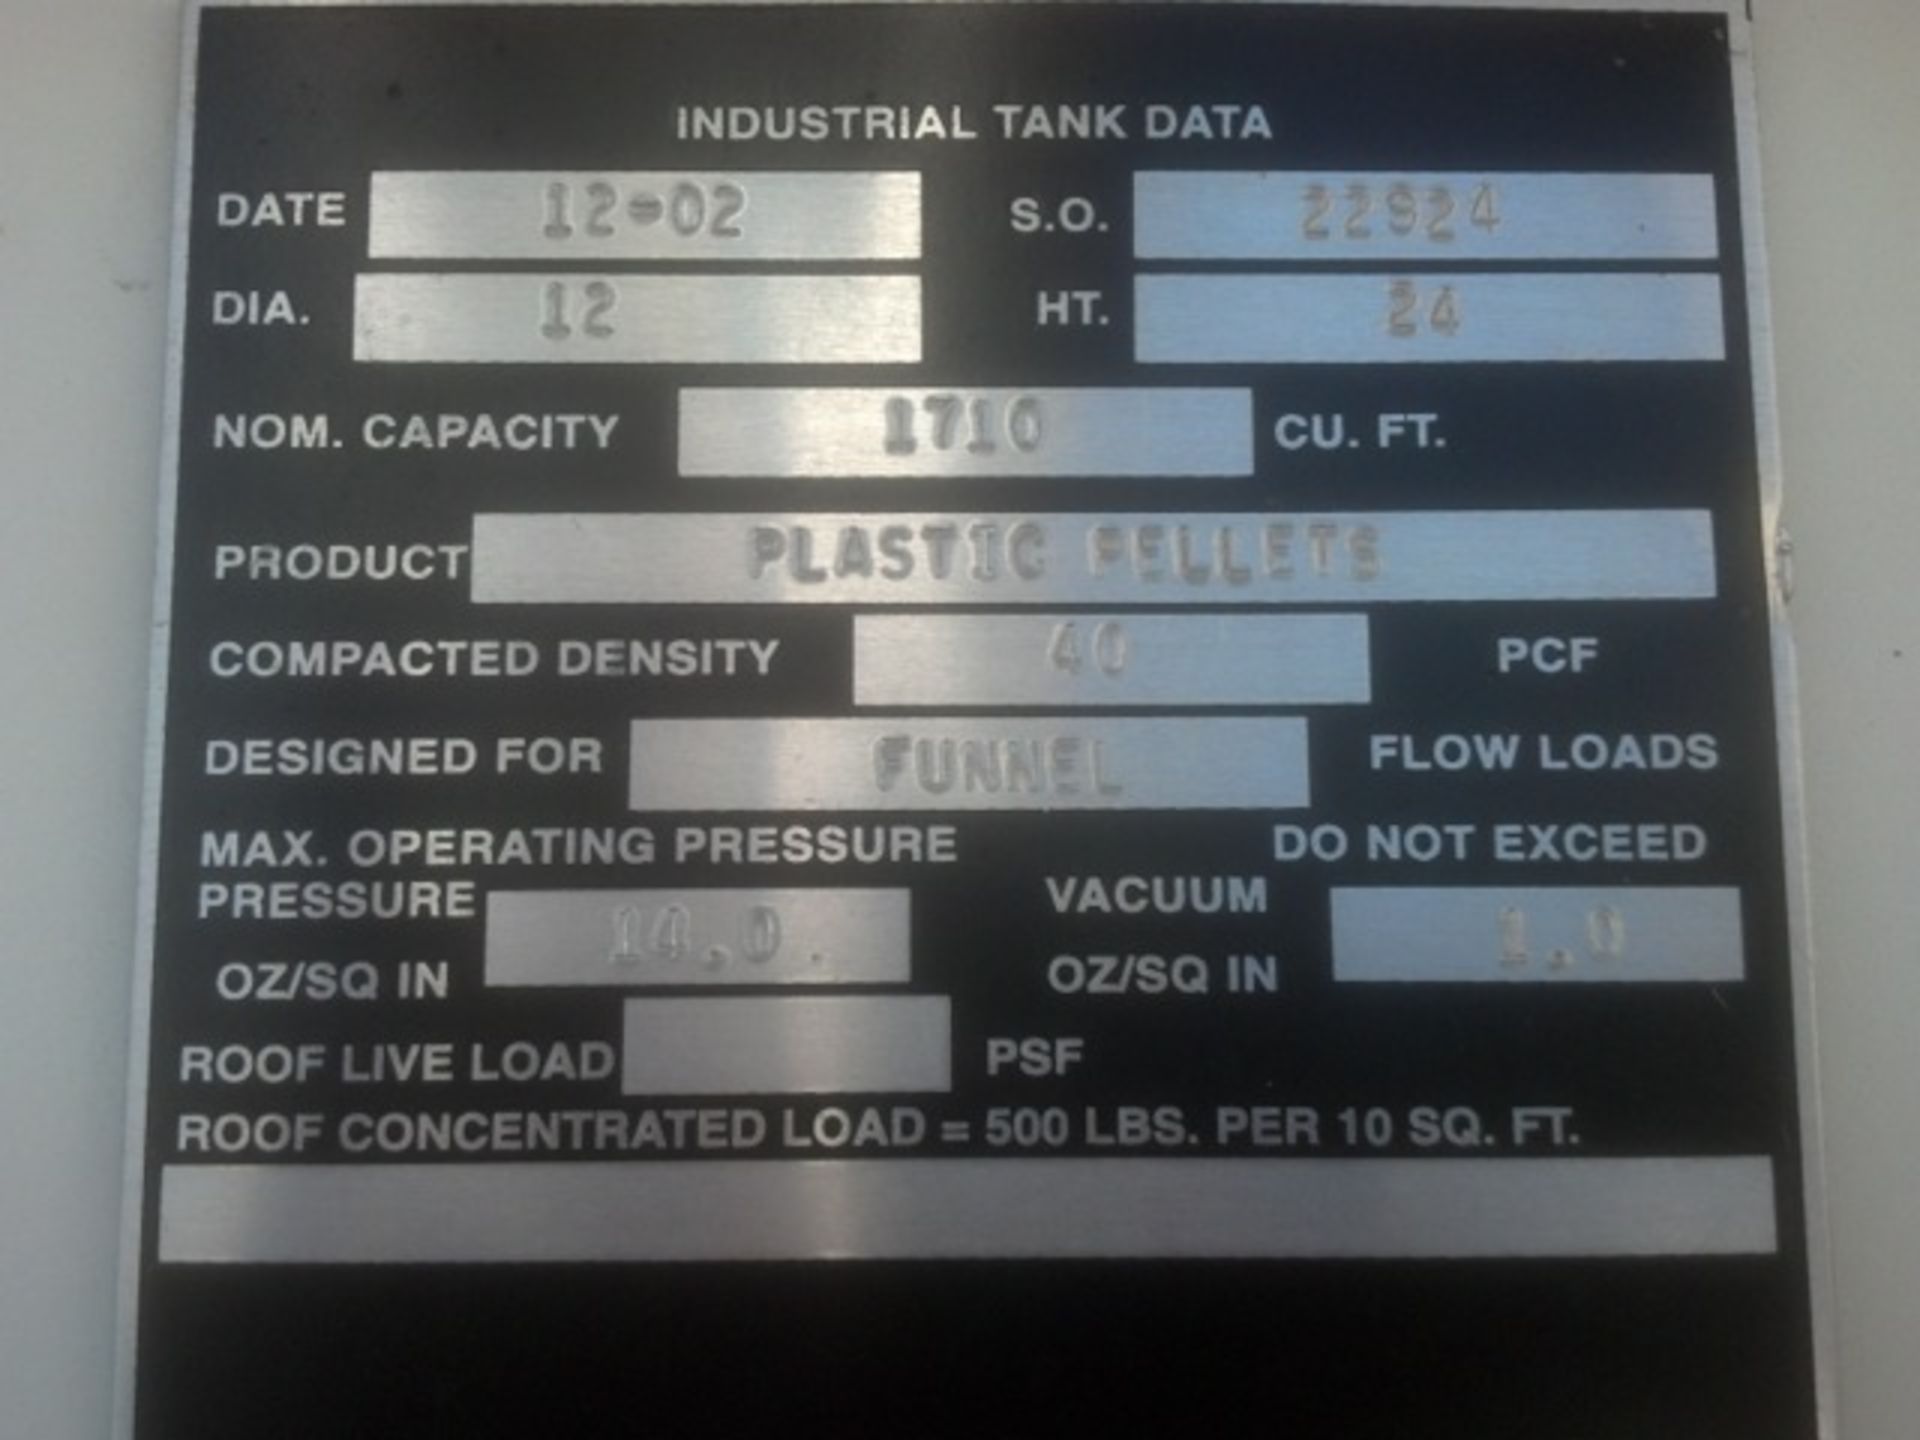 1710 cu. ft. 12' x 24' Silo for Plastic Pellets w/ Level Indicator (2002) - Image 3 of 4